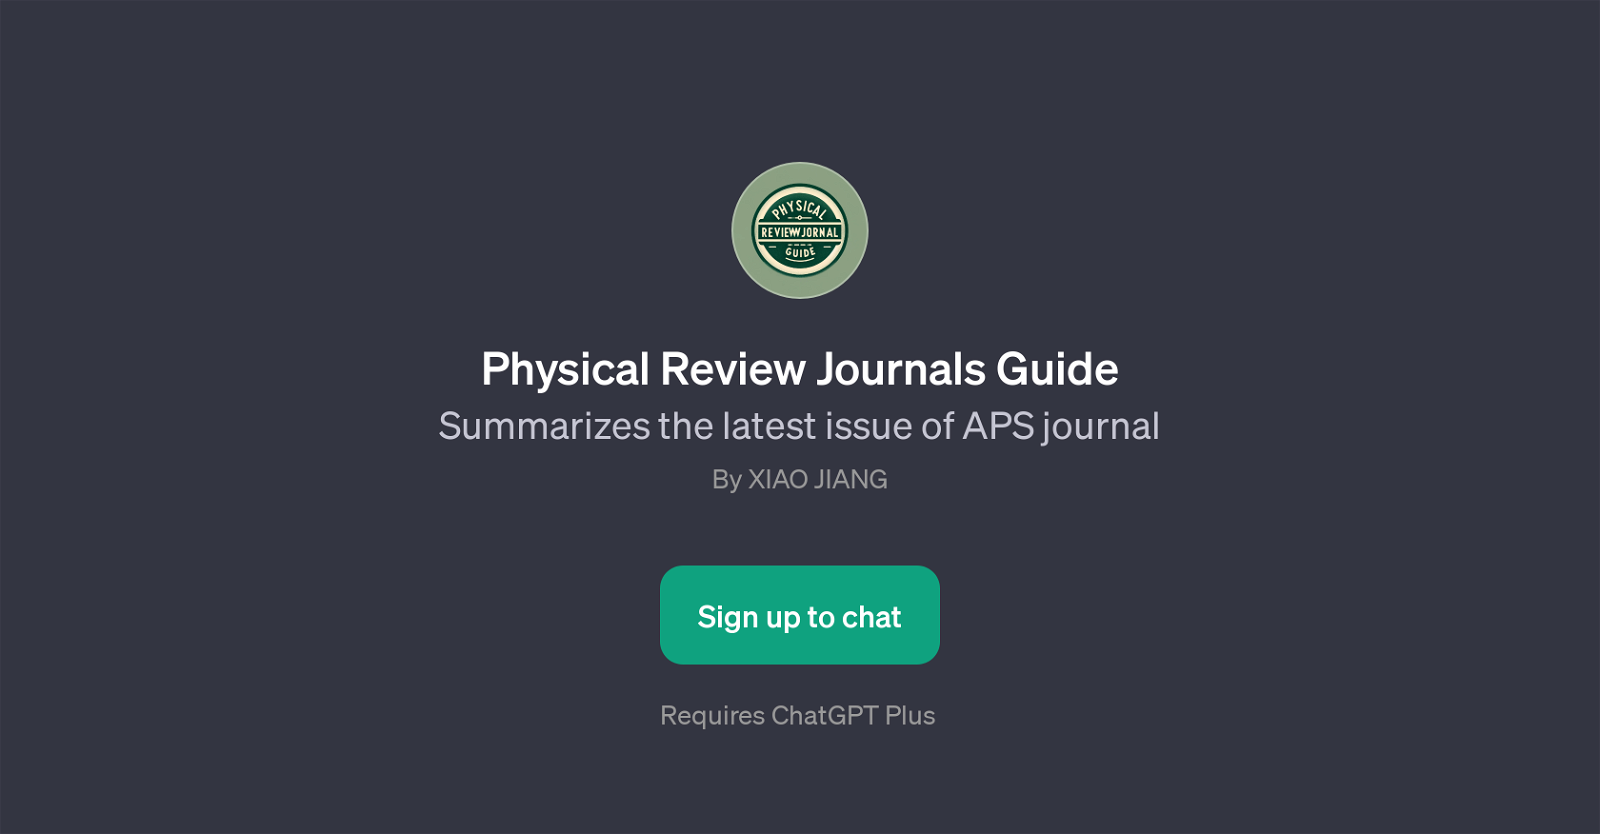 Physical Review Journals Guide website